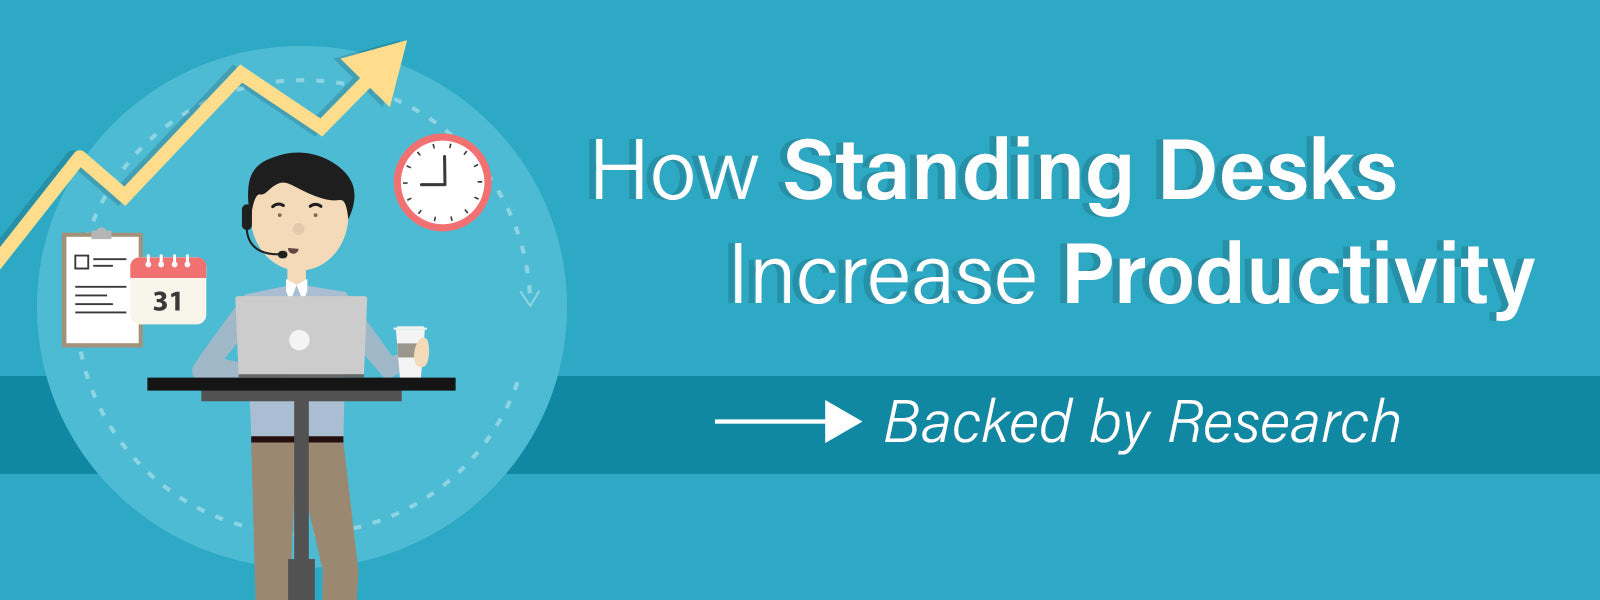 How Standing Desks Increase Productivity Backed By Research